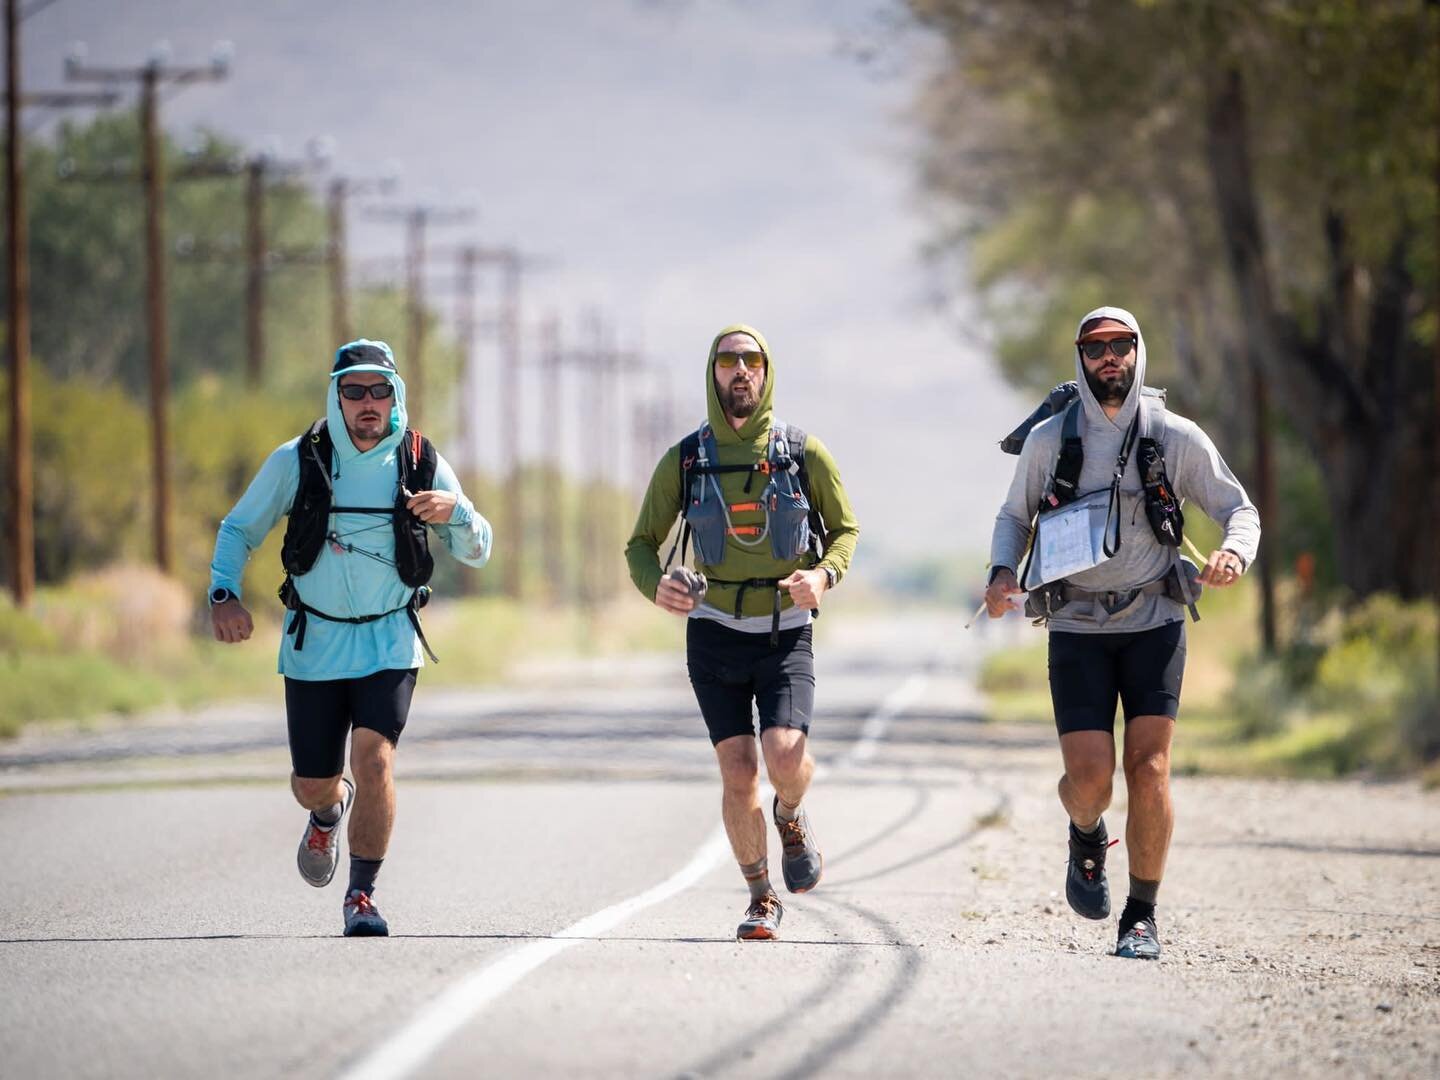 Teams continue to make their way to the finish line. Some run, some jog, some stroll. And all of them cross the line with a huge smile! 

KEEP TRACKING THE TEAMS
https://www.adventureracinginsider.com/usaranationals22

The 2022 USARA season is brough